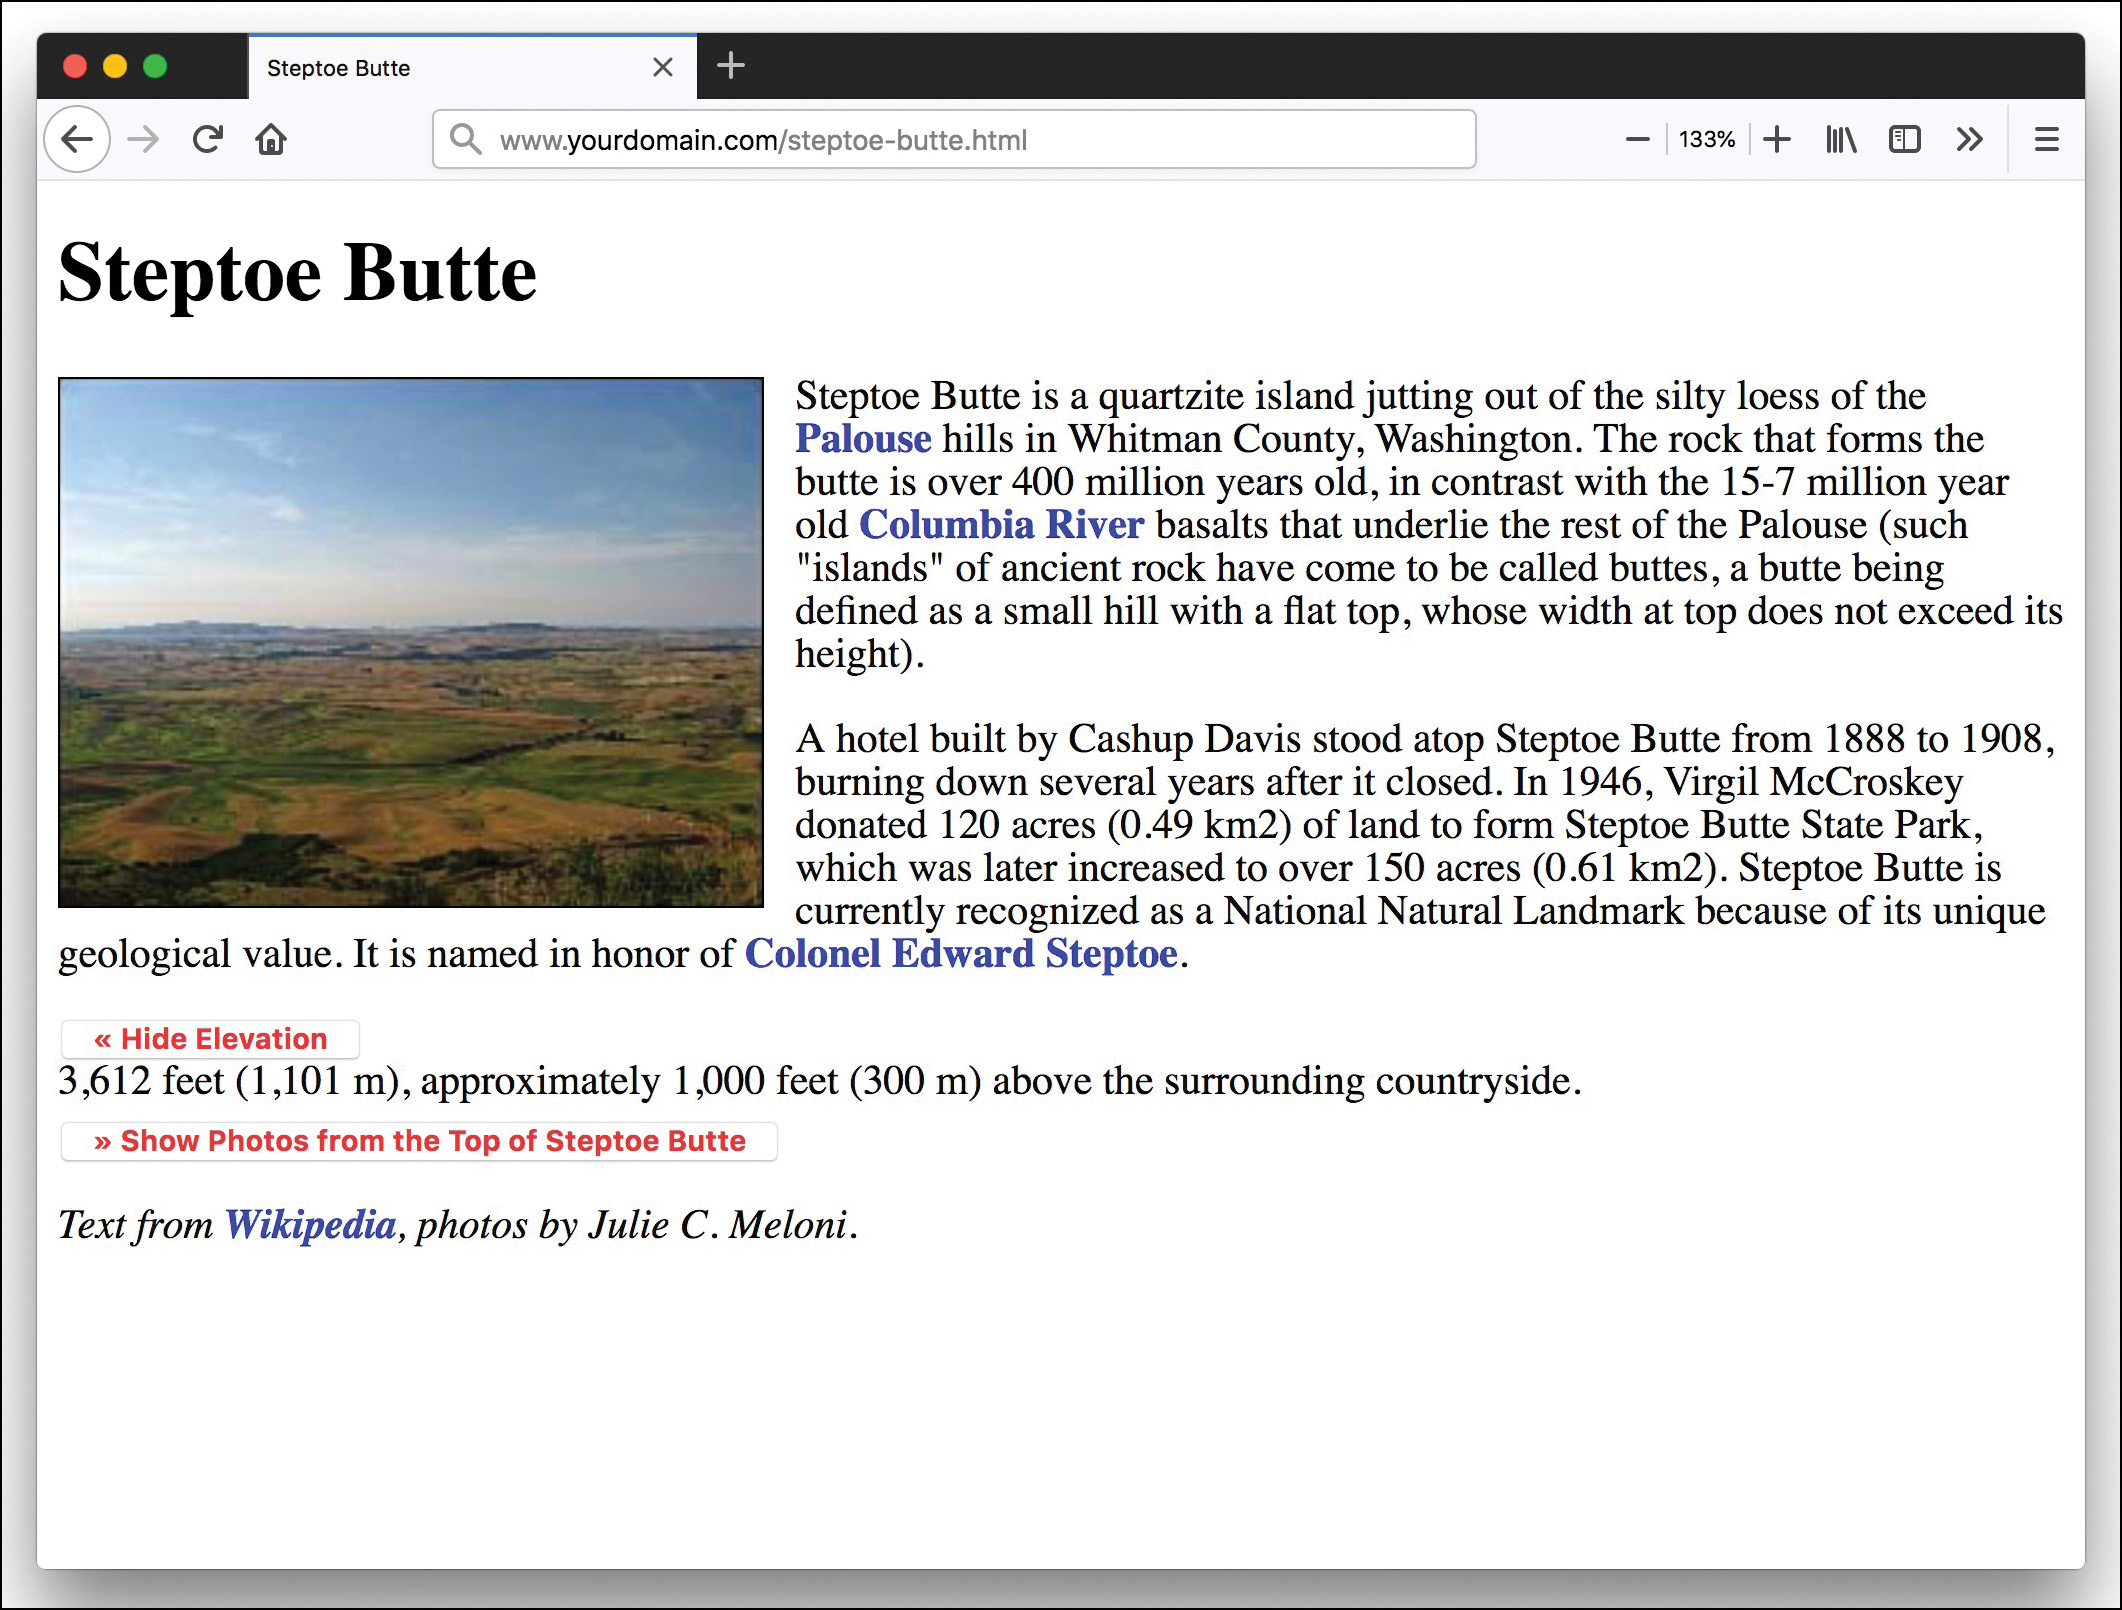 A screenshot of the Steptoe Butte is shown, where, the show elevation button is changed into Hide Elevation, and below the button, a text displays the elevation details.